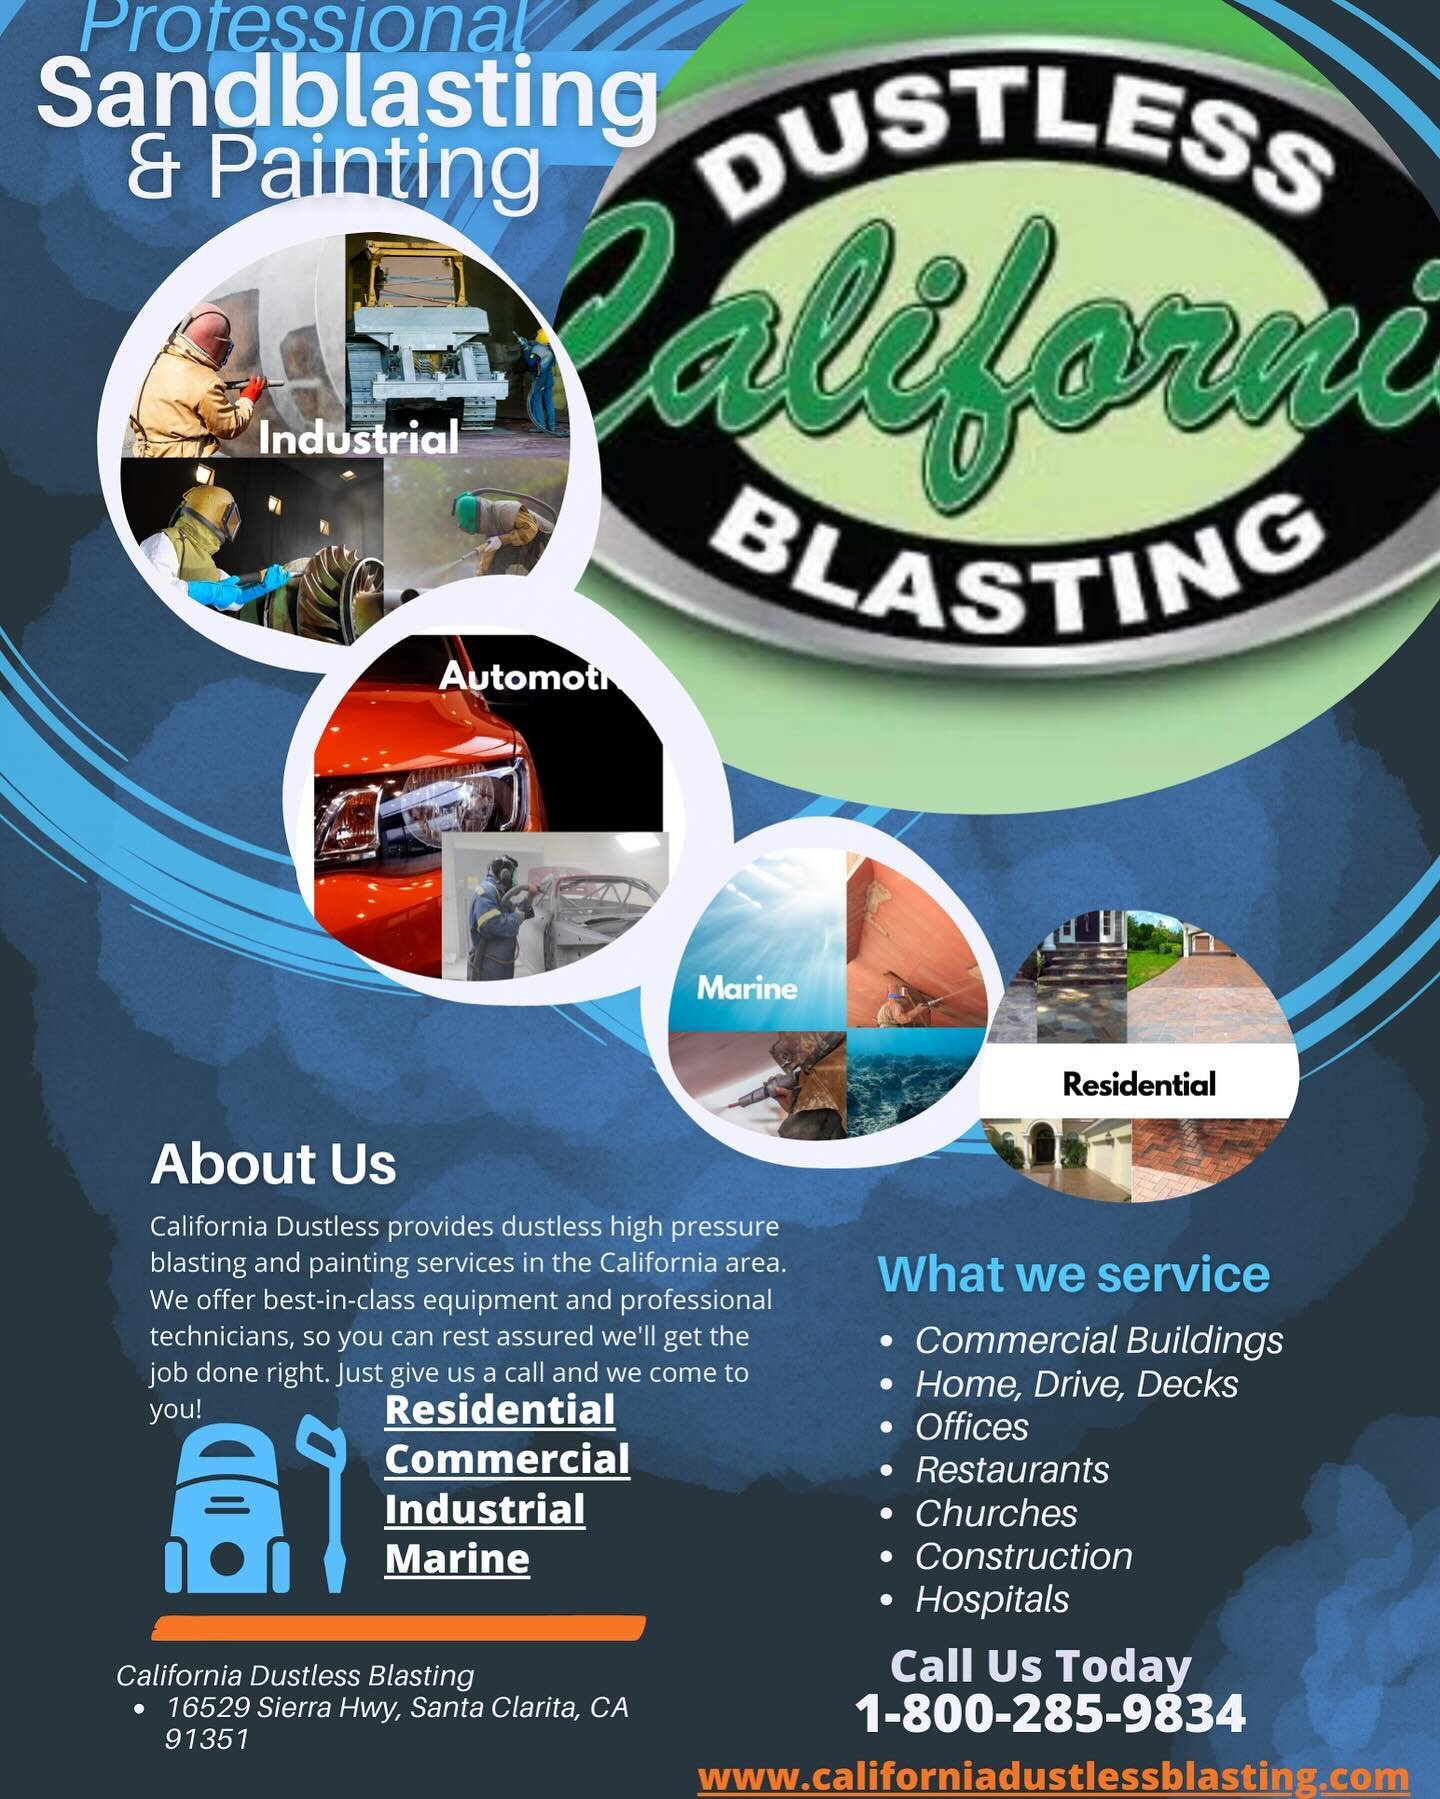 Call or email today for a free quote. Let us help you start the new year off right! Info@californiadustlessblasting.com
#sandblasting #sandblast #sandblasted #dustlessblasting #dustless #dustlesssanding #restoration #automotiverestoration #paintingco